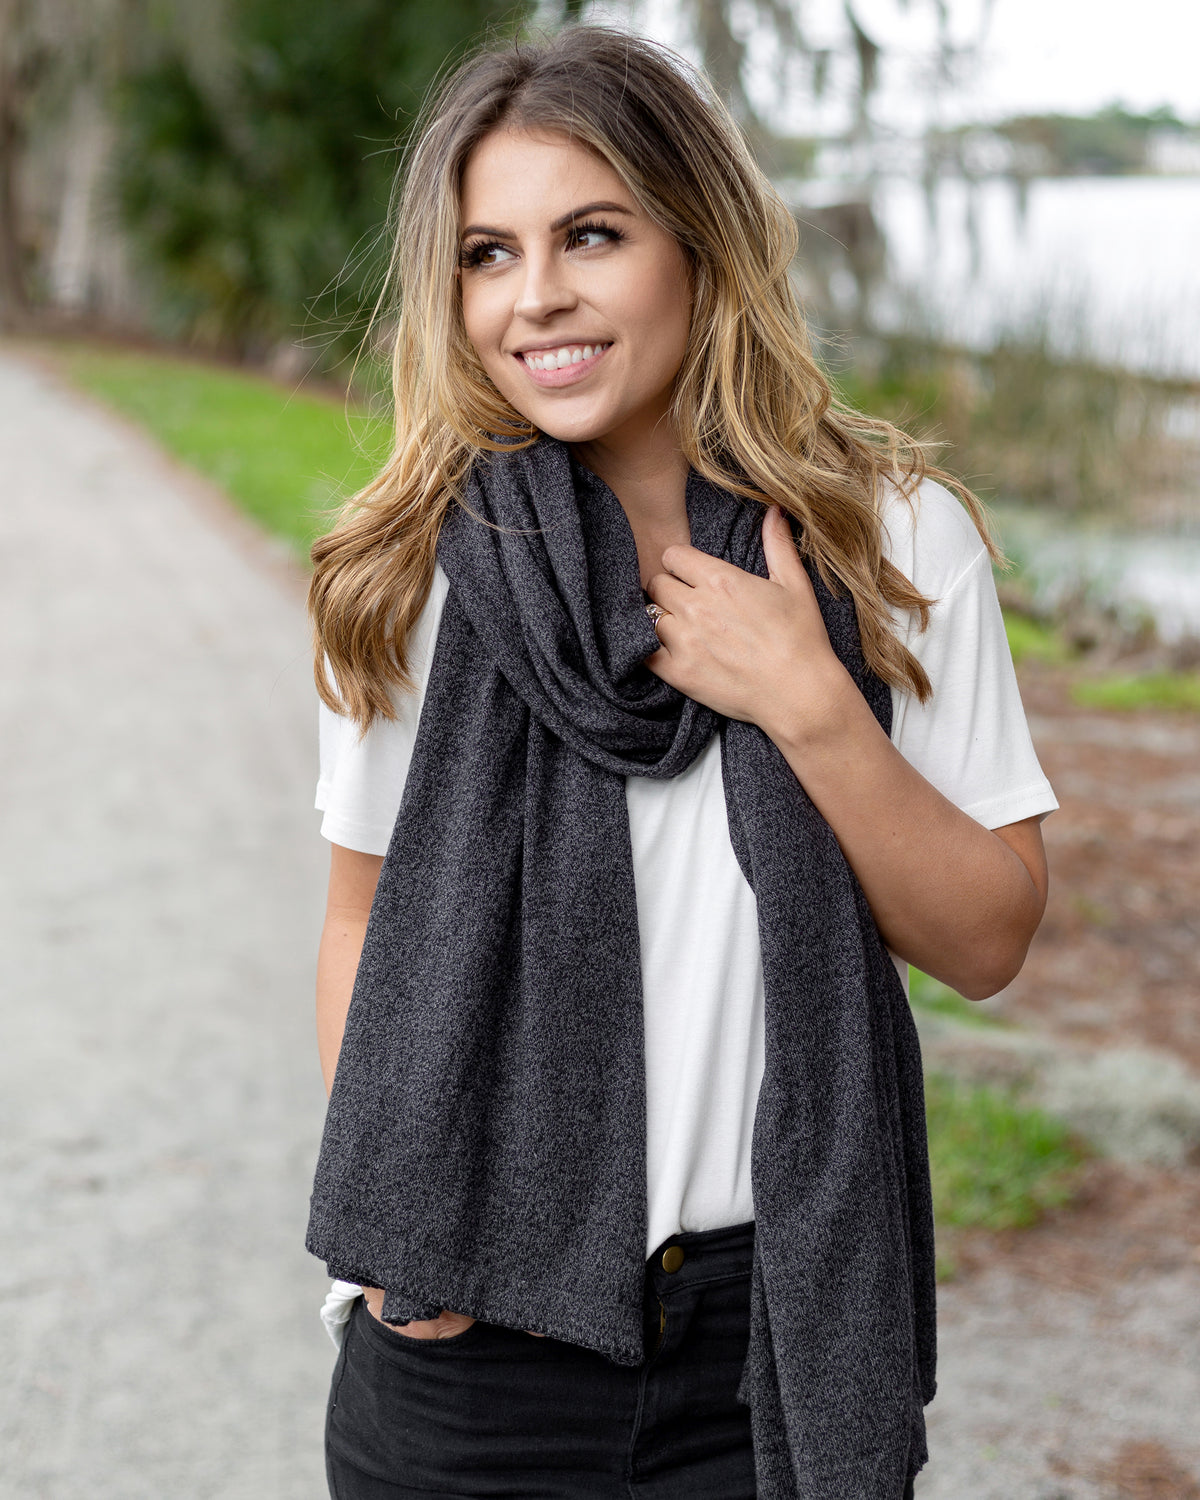 Woman wearing the Dreamsoft Travel Scarf in Graphite which is a gray scarf, worn as the modern loop with her hand in her pocket and other hand on the scarf